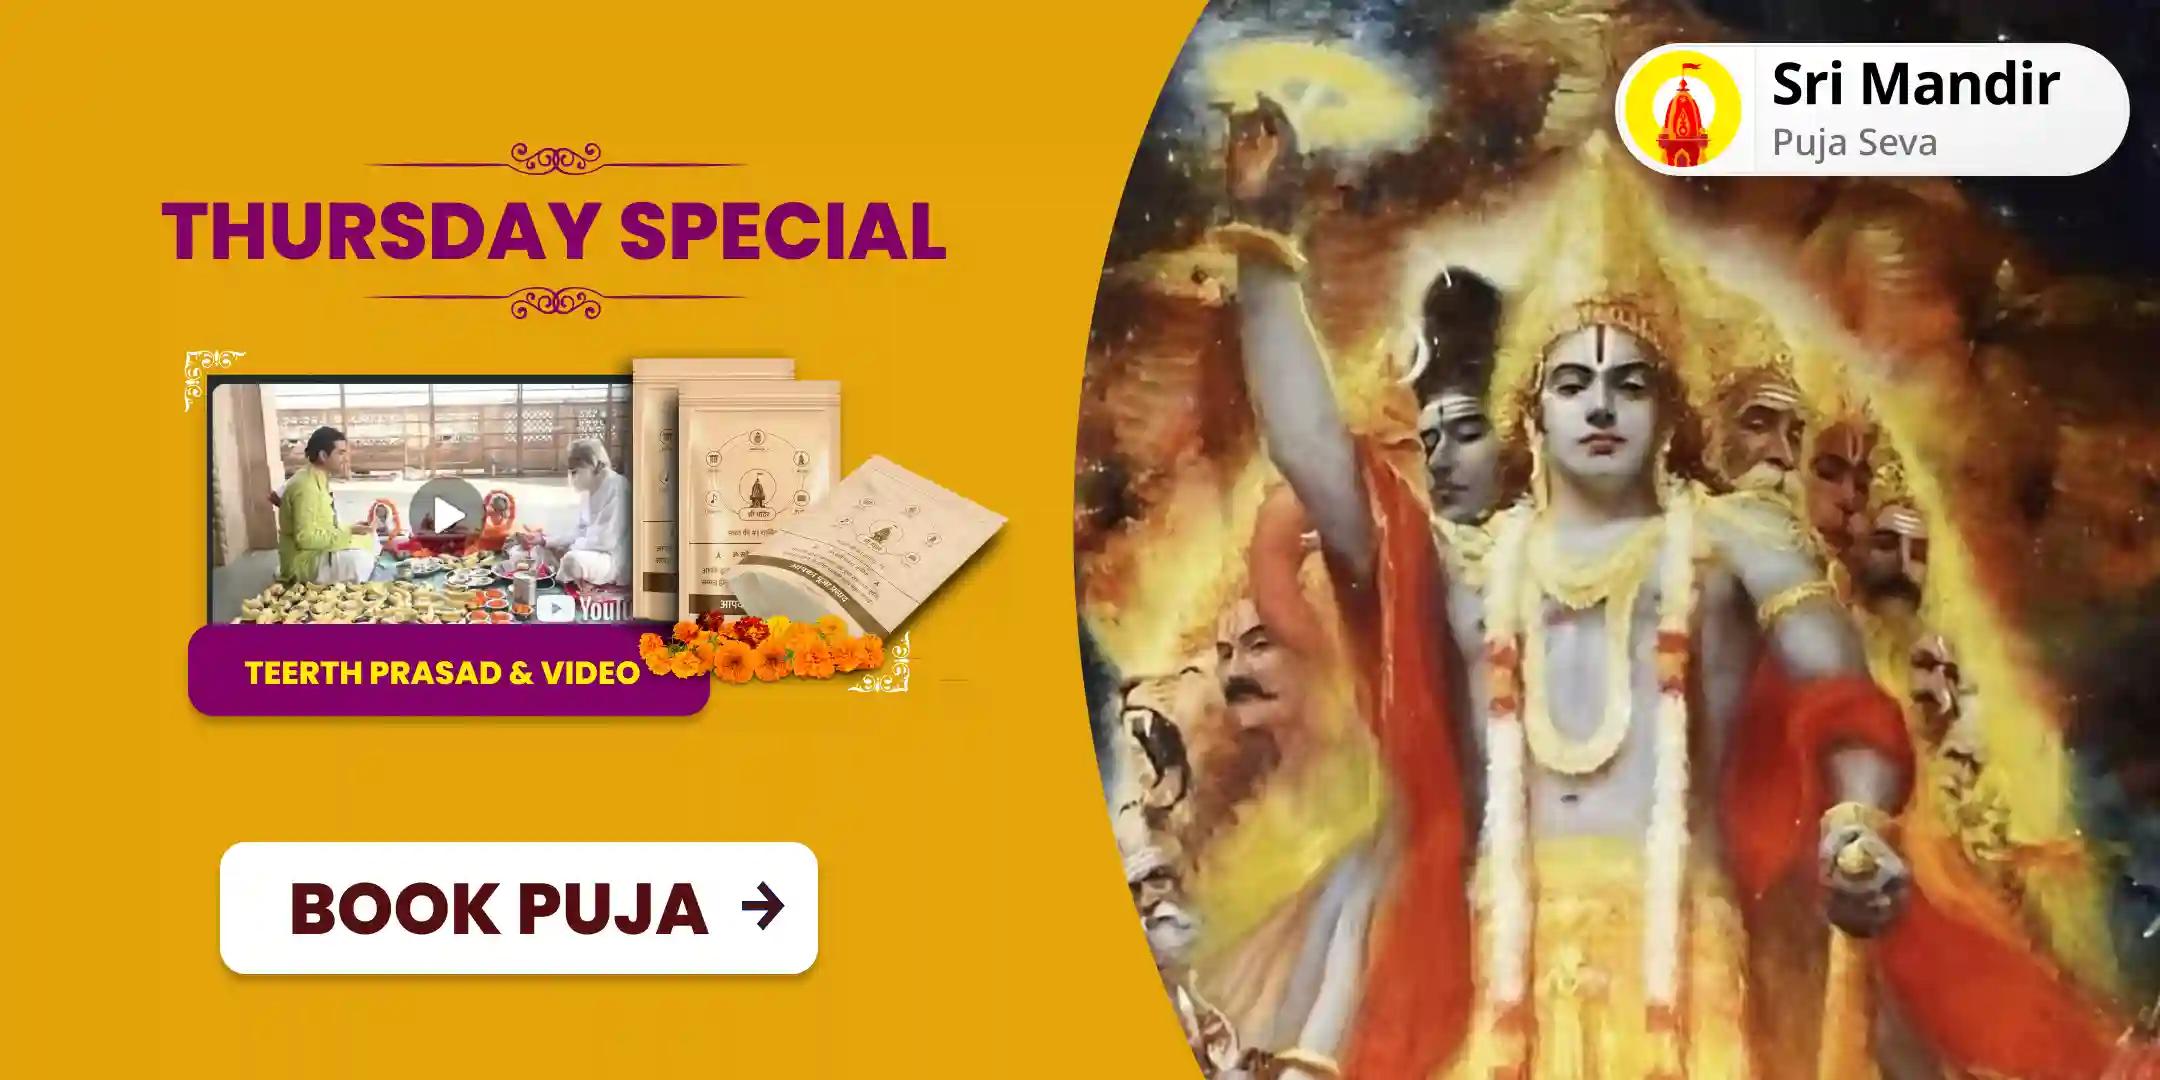 Thursday Special Vishnu Sudarshan Havan and Sahasranama Path for Promoting Stability and Prosperity in Life